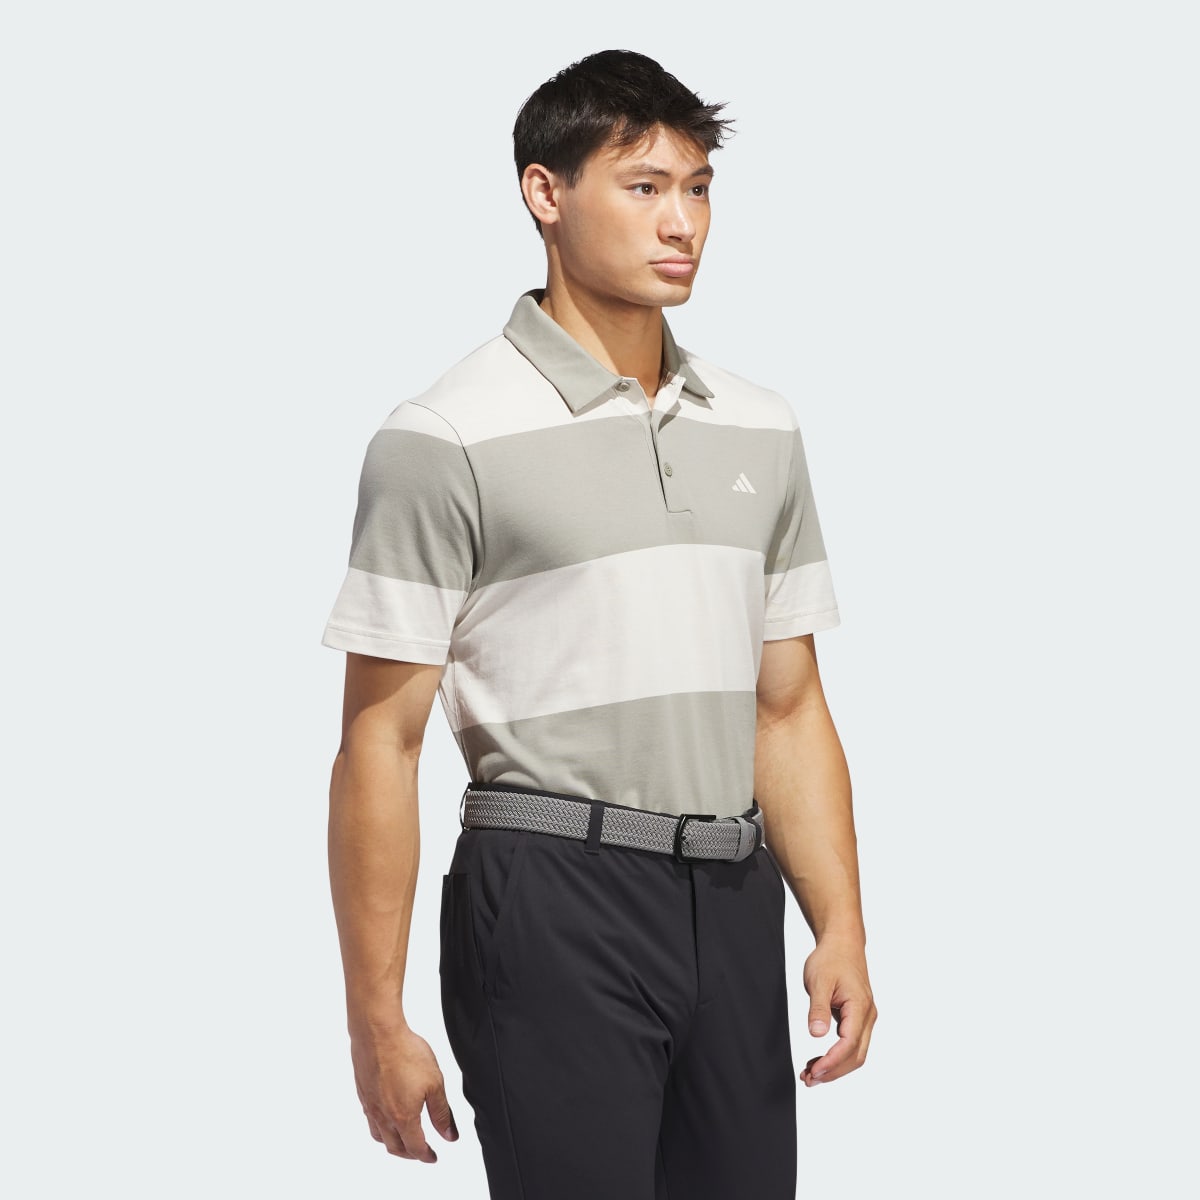 Adidas Colorblock Rugby Stripe Polo Shirt. 4